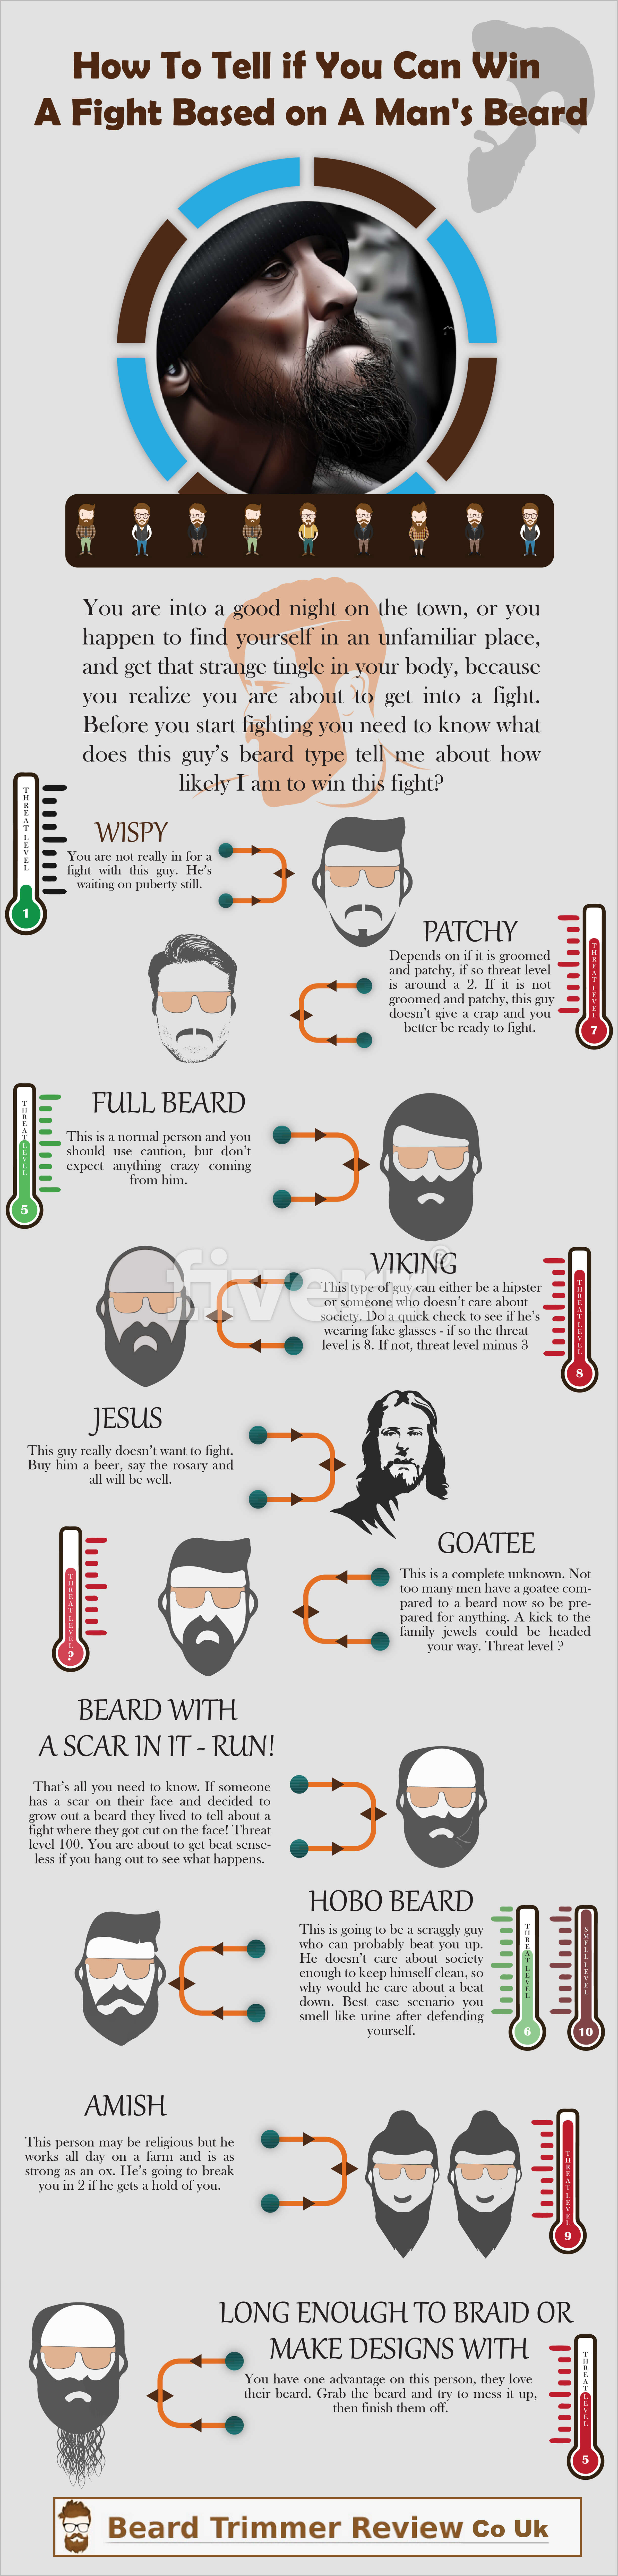 How to Tell if You Can Win a Fight a Fight Based on a Man's Beard